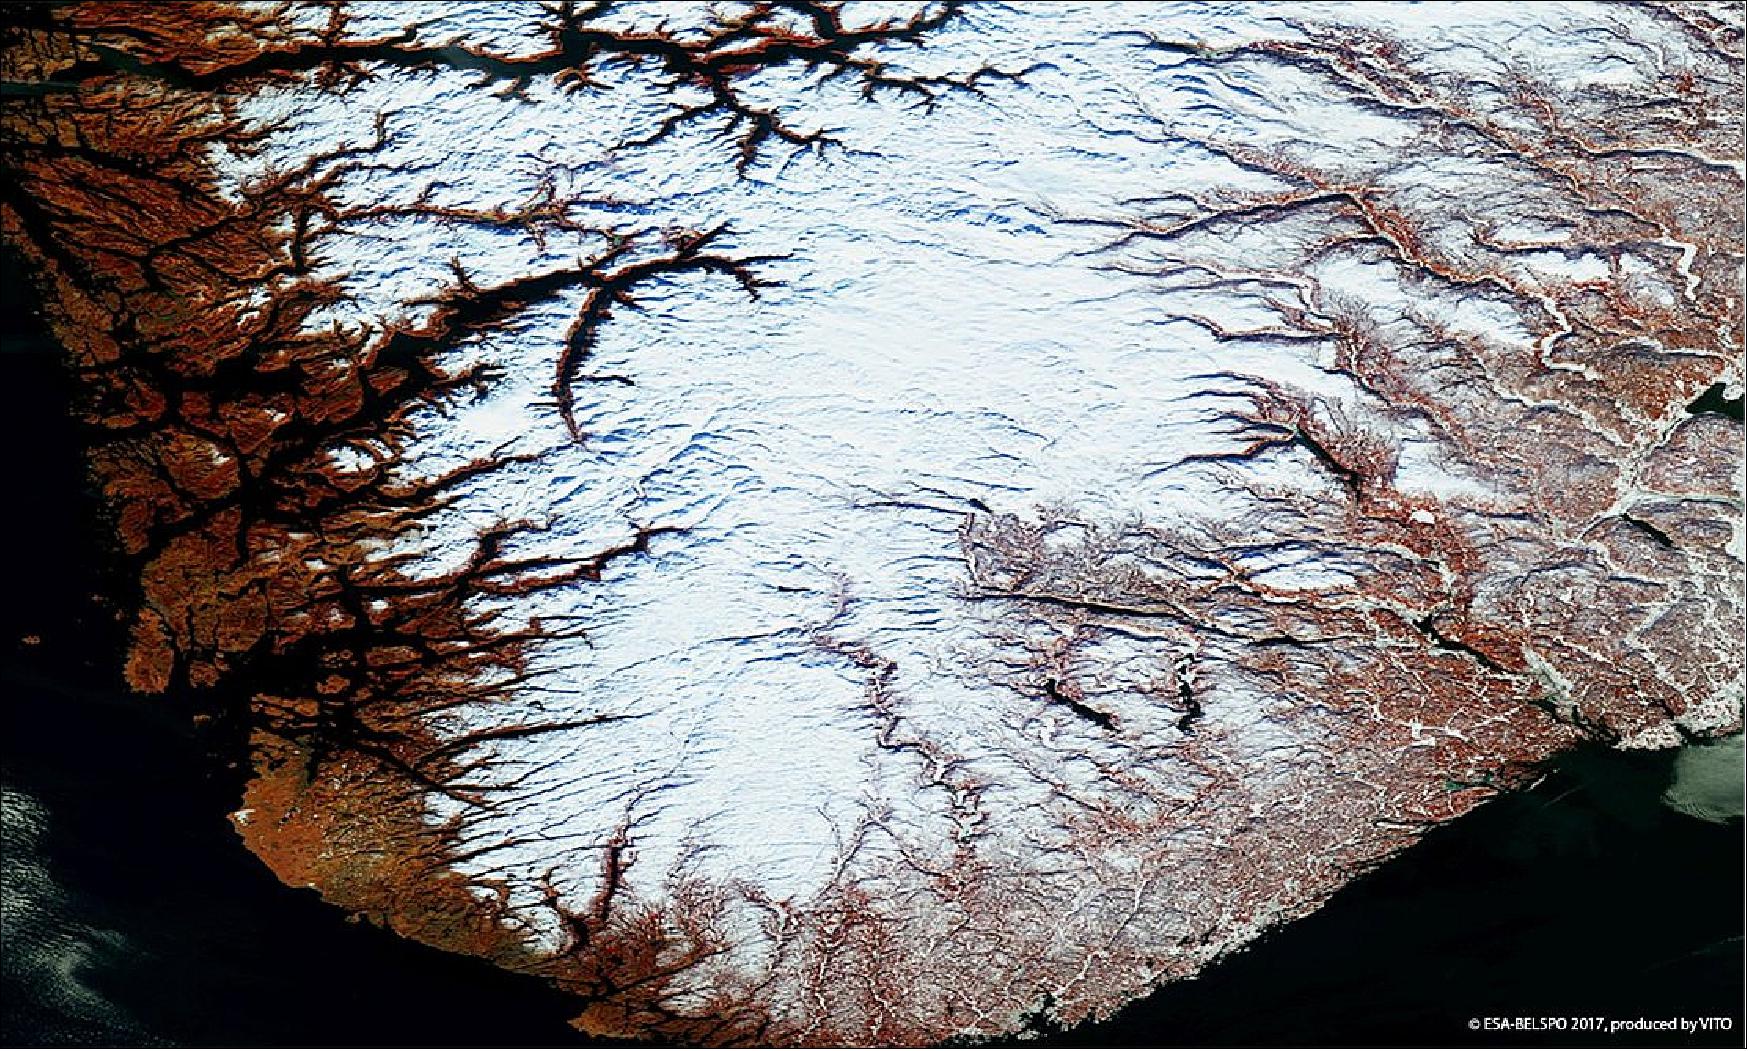 Figure 42: Norwegian fjords imaged by PROBA-V, the image was acquired on 14 February 2017 (image credit: ESA/BELSPO – produced by VITO)